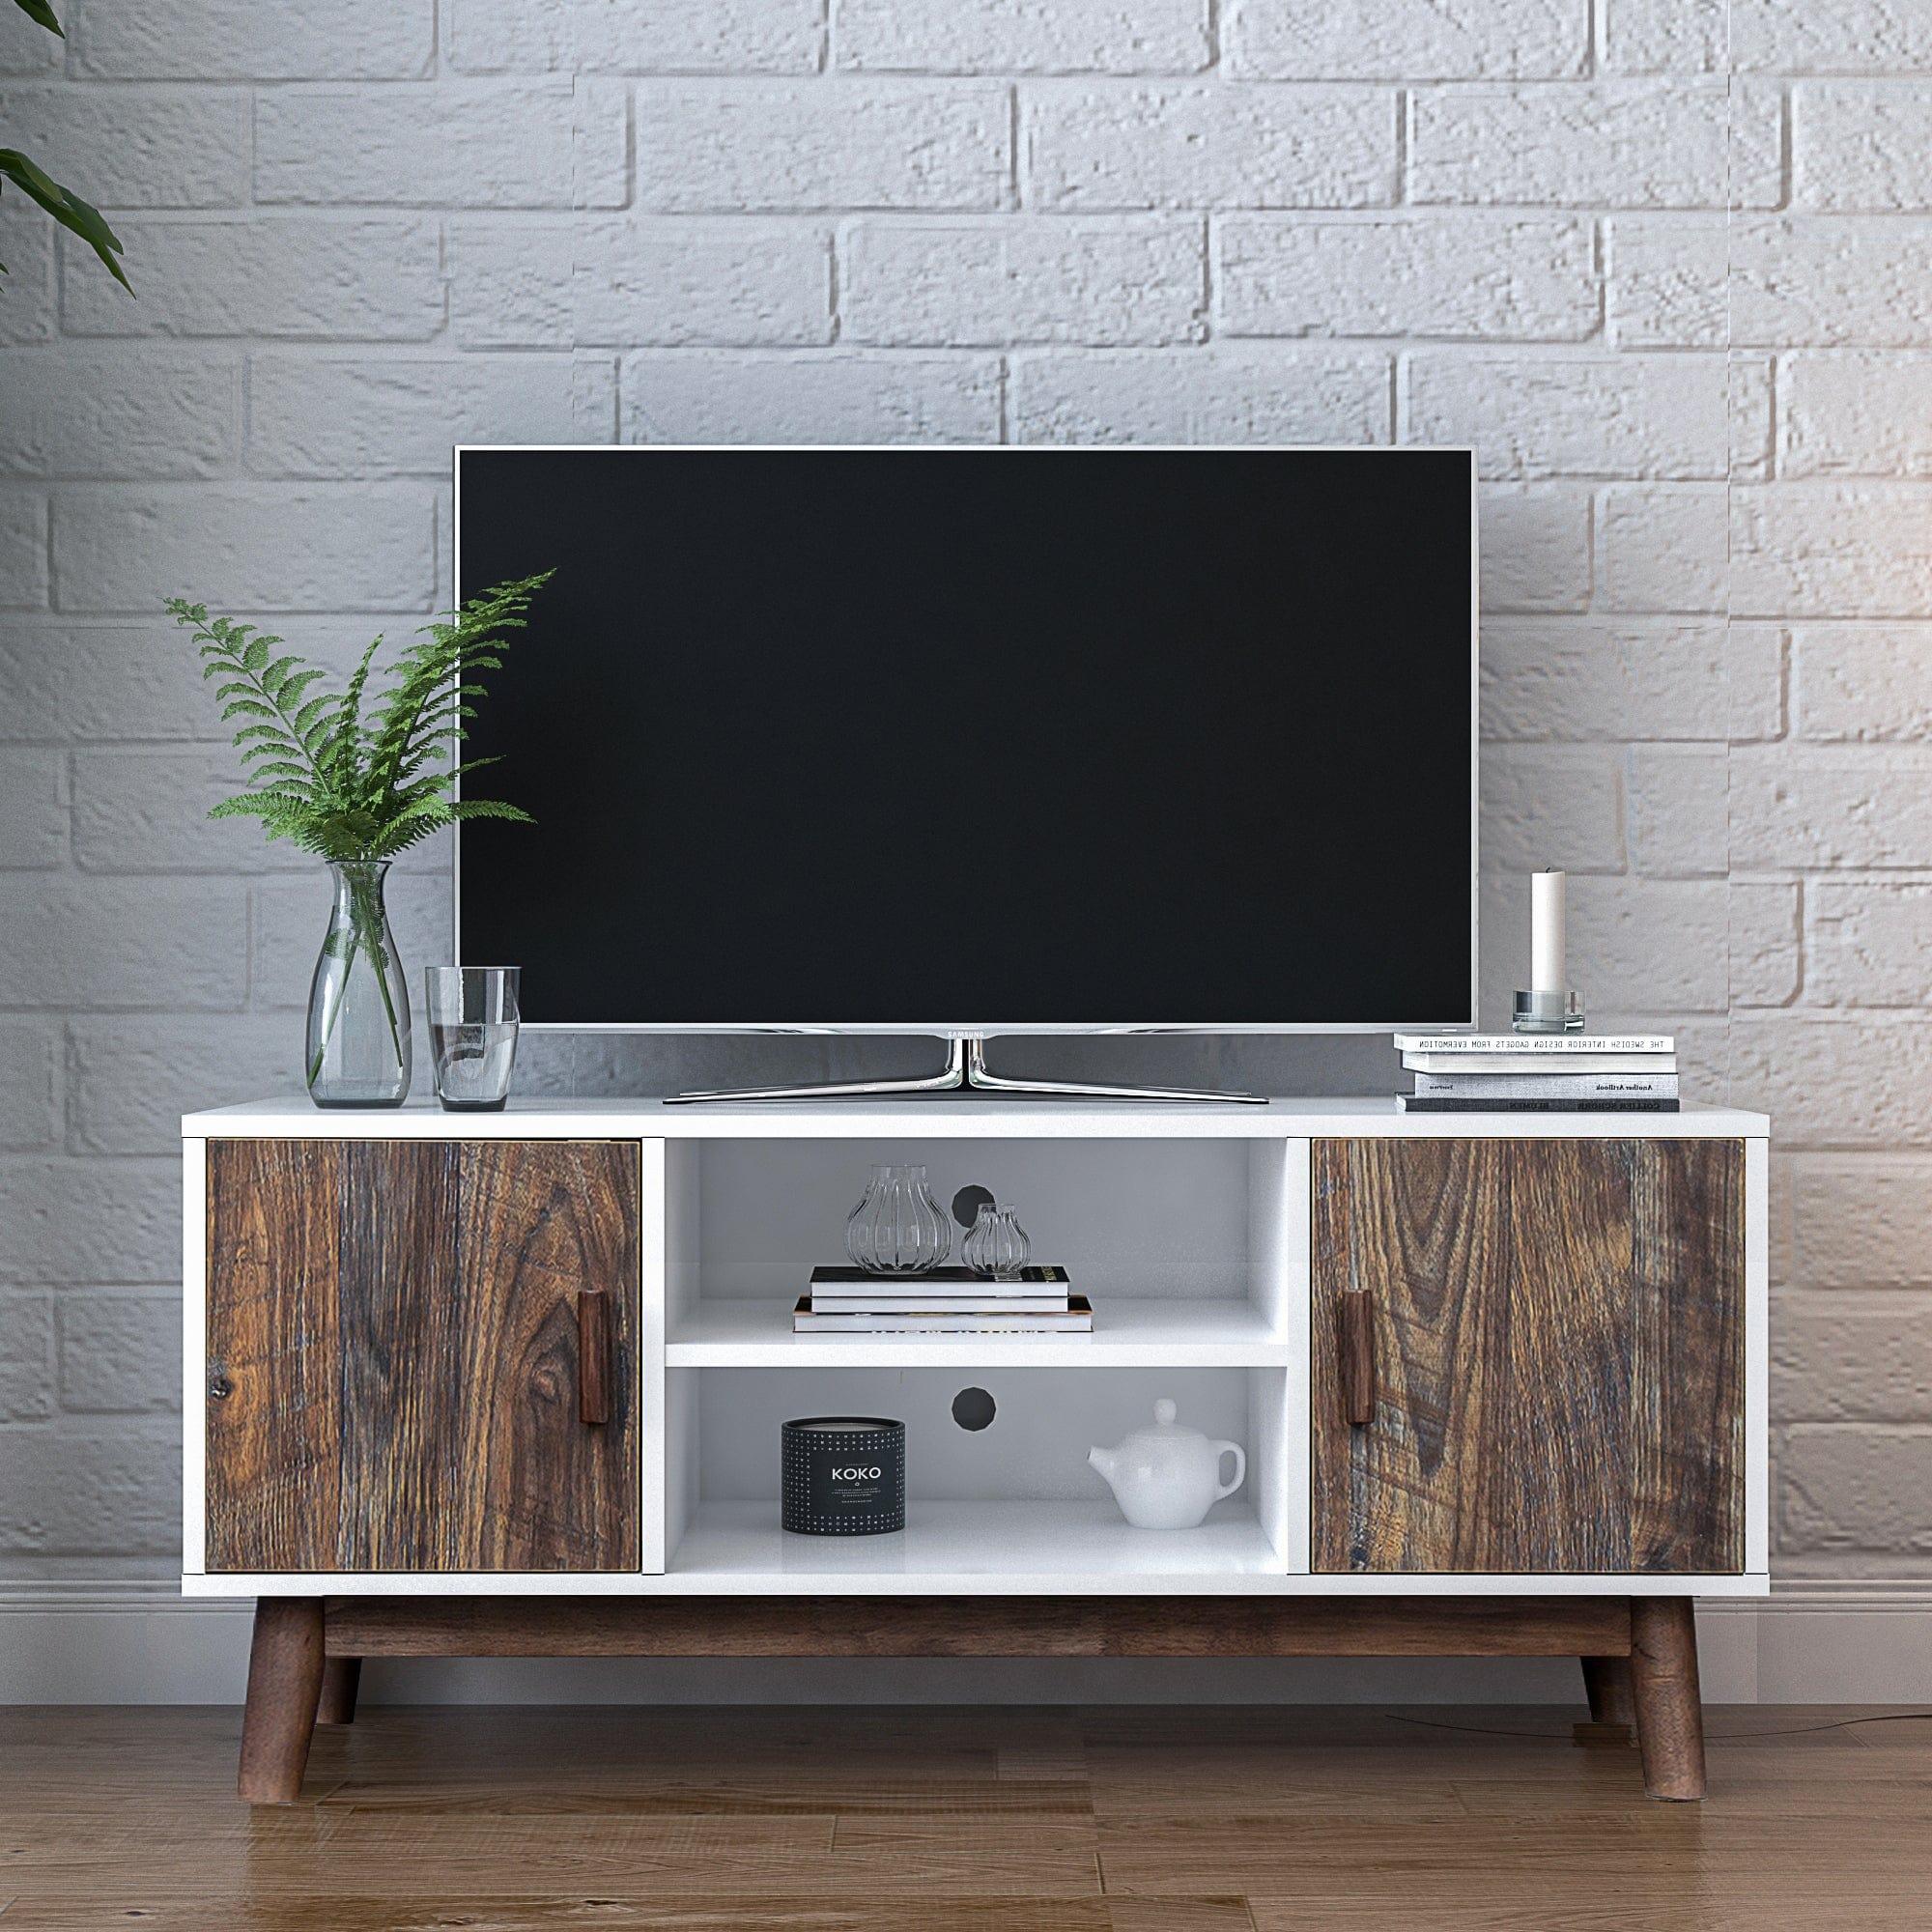 Shop TV Stand Mid-Century Wood Modern Entertainment Center Adjustable Storage Cabinet TV Console for Living Room , White & Espresso Mademoiselle Home Decor